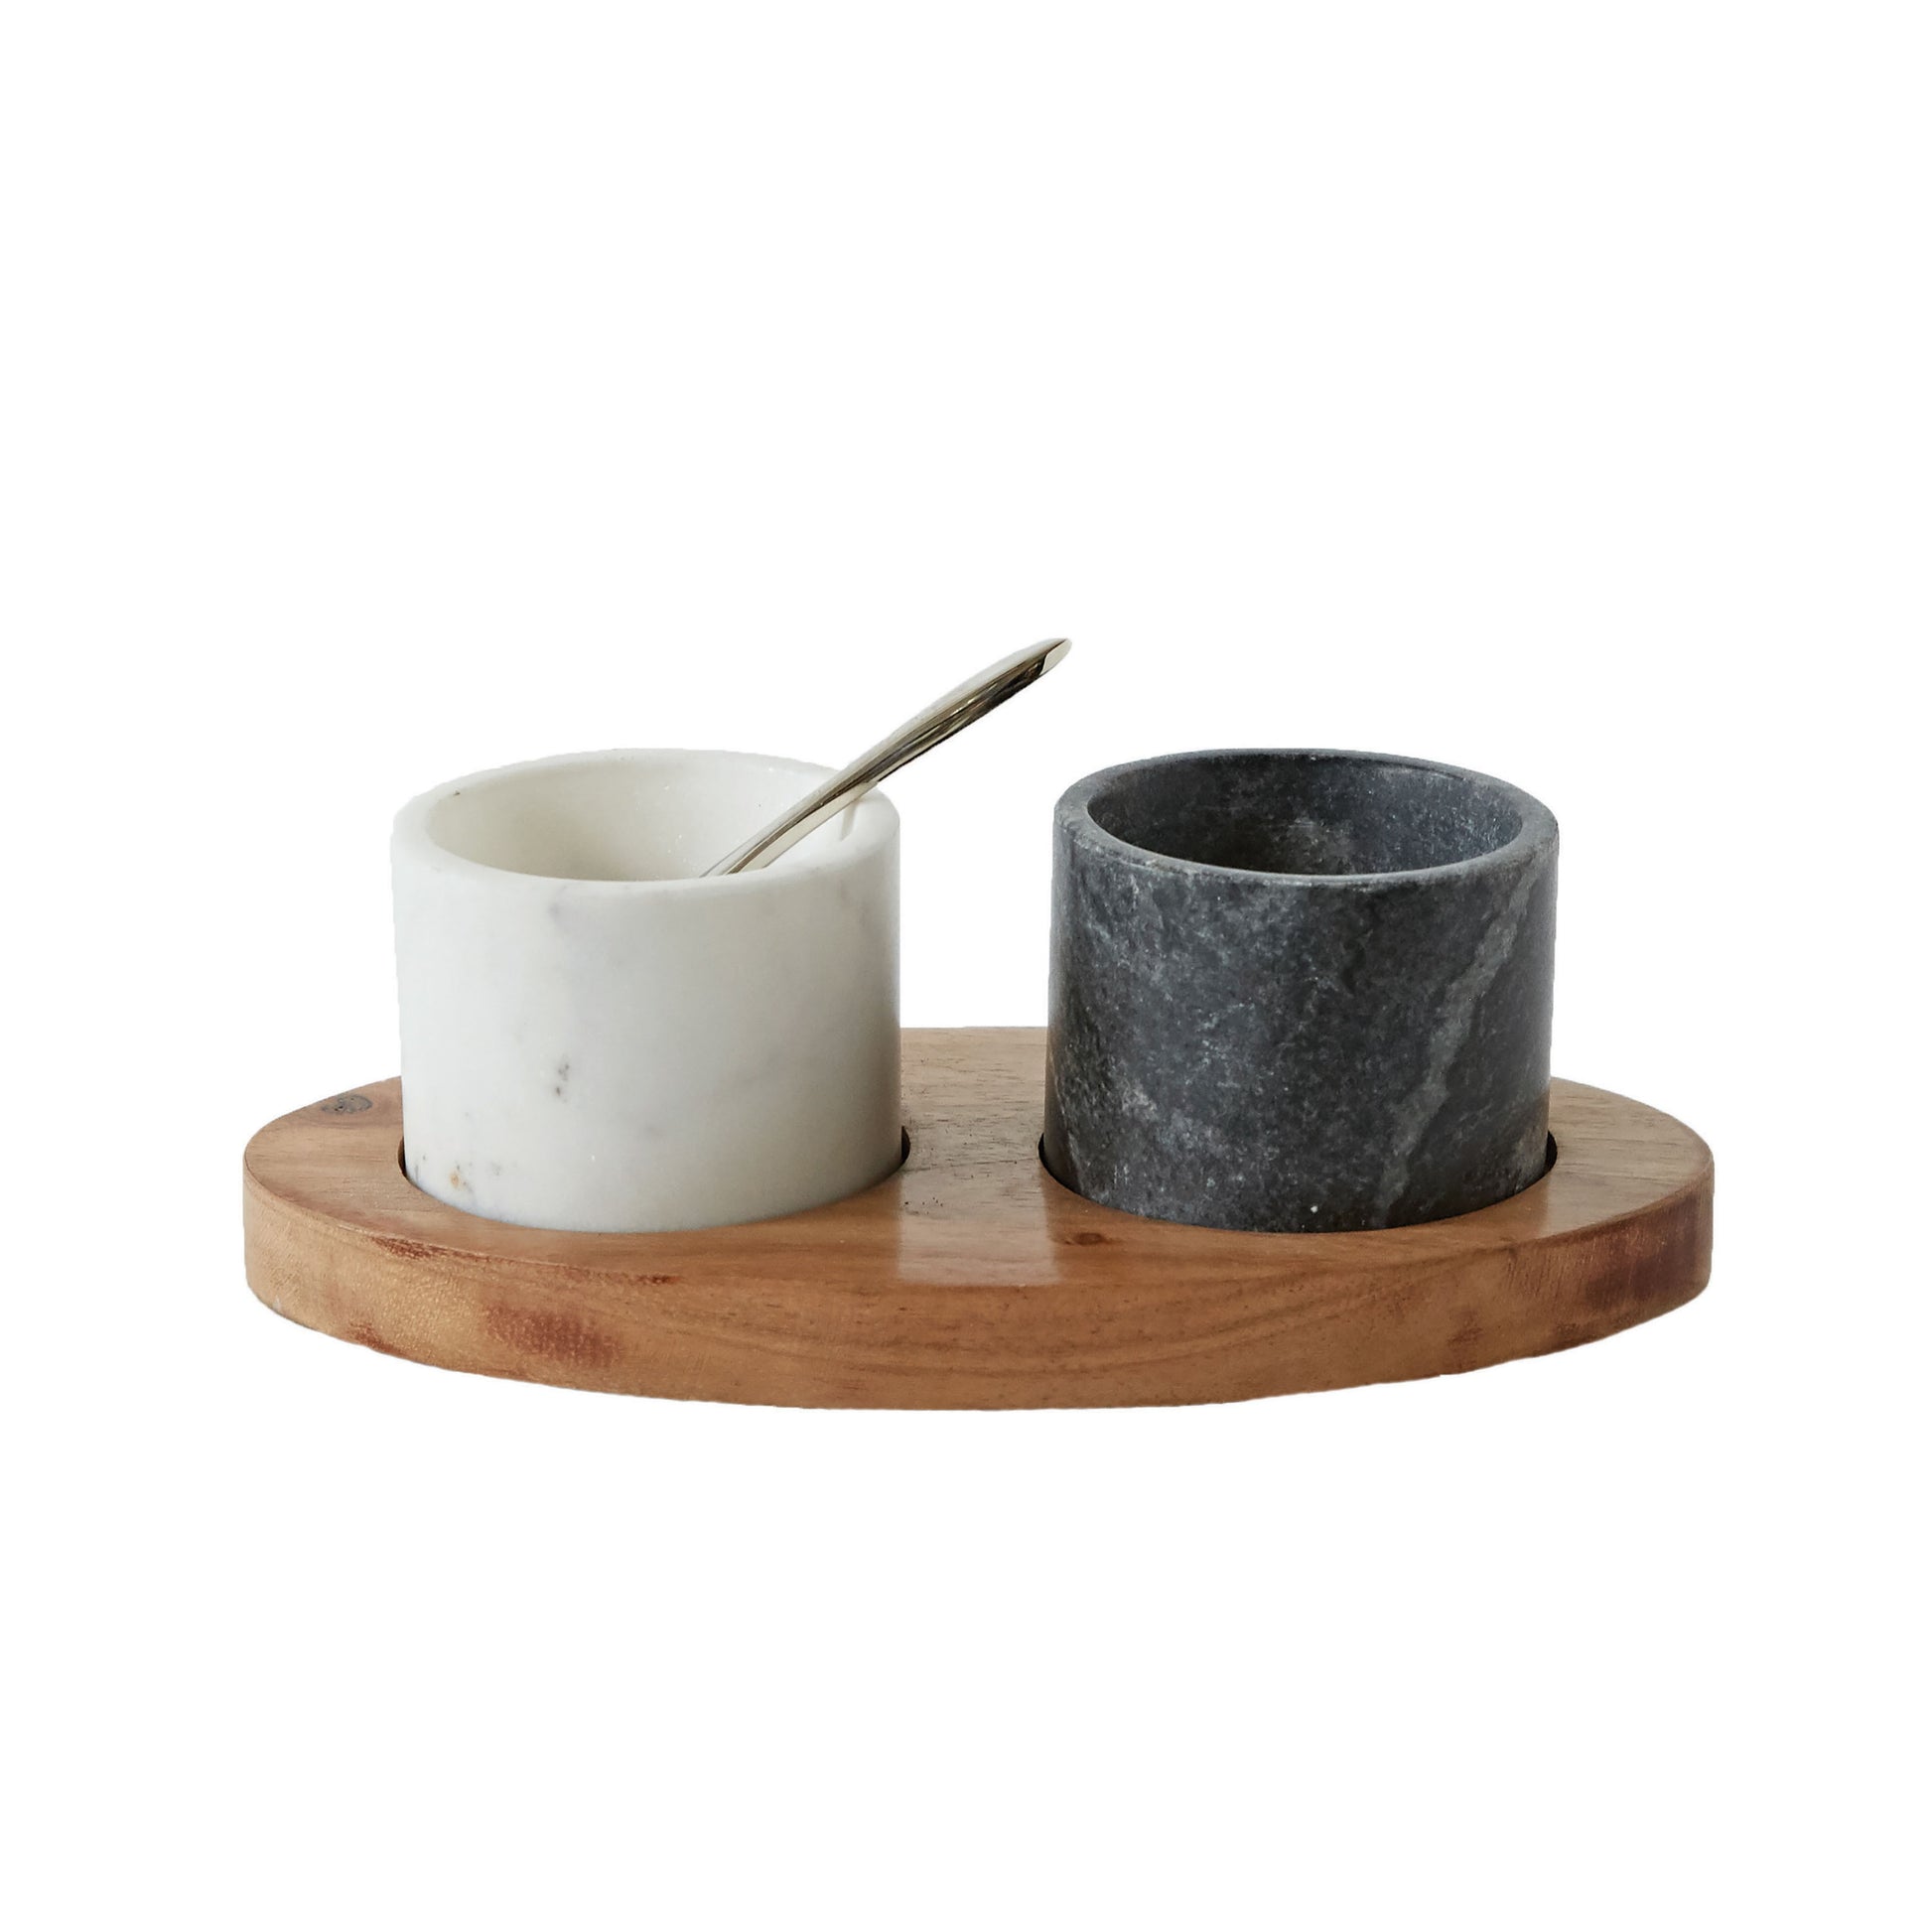 Marble Bowls on Mango Wood Tray with Brass Salt Spoon (Set of 4 Pieces) - Mellow Monkey